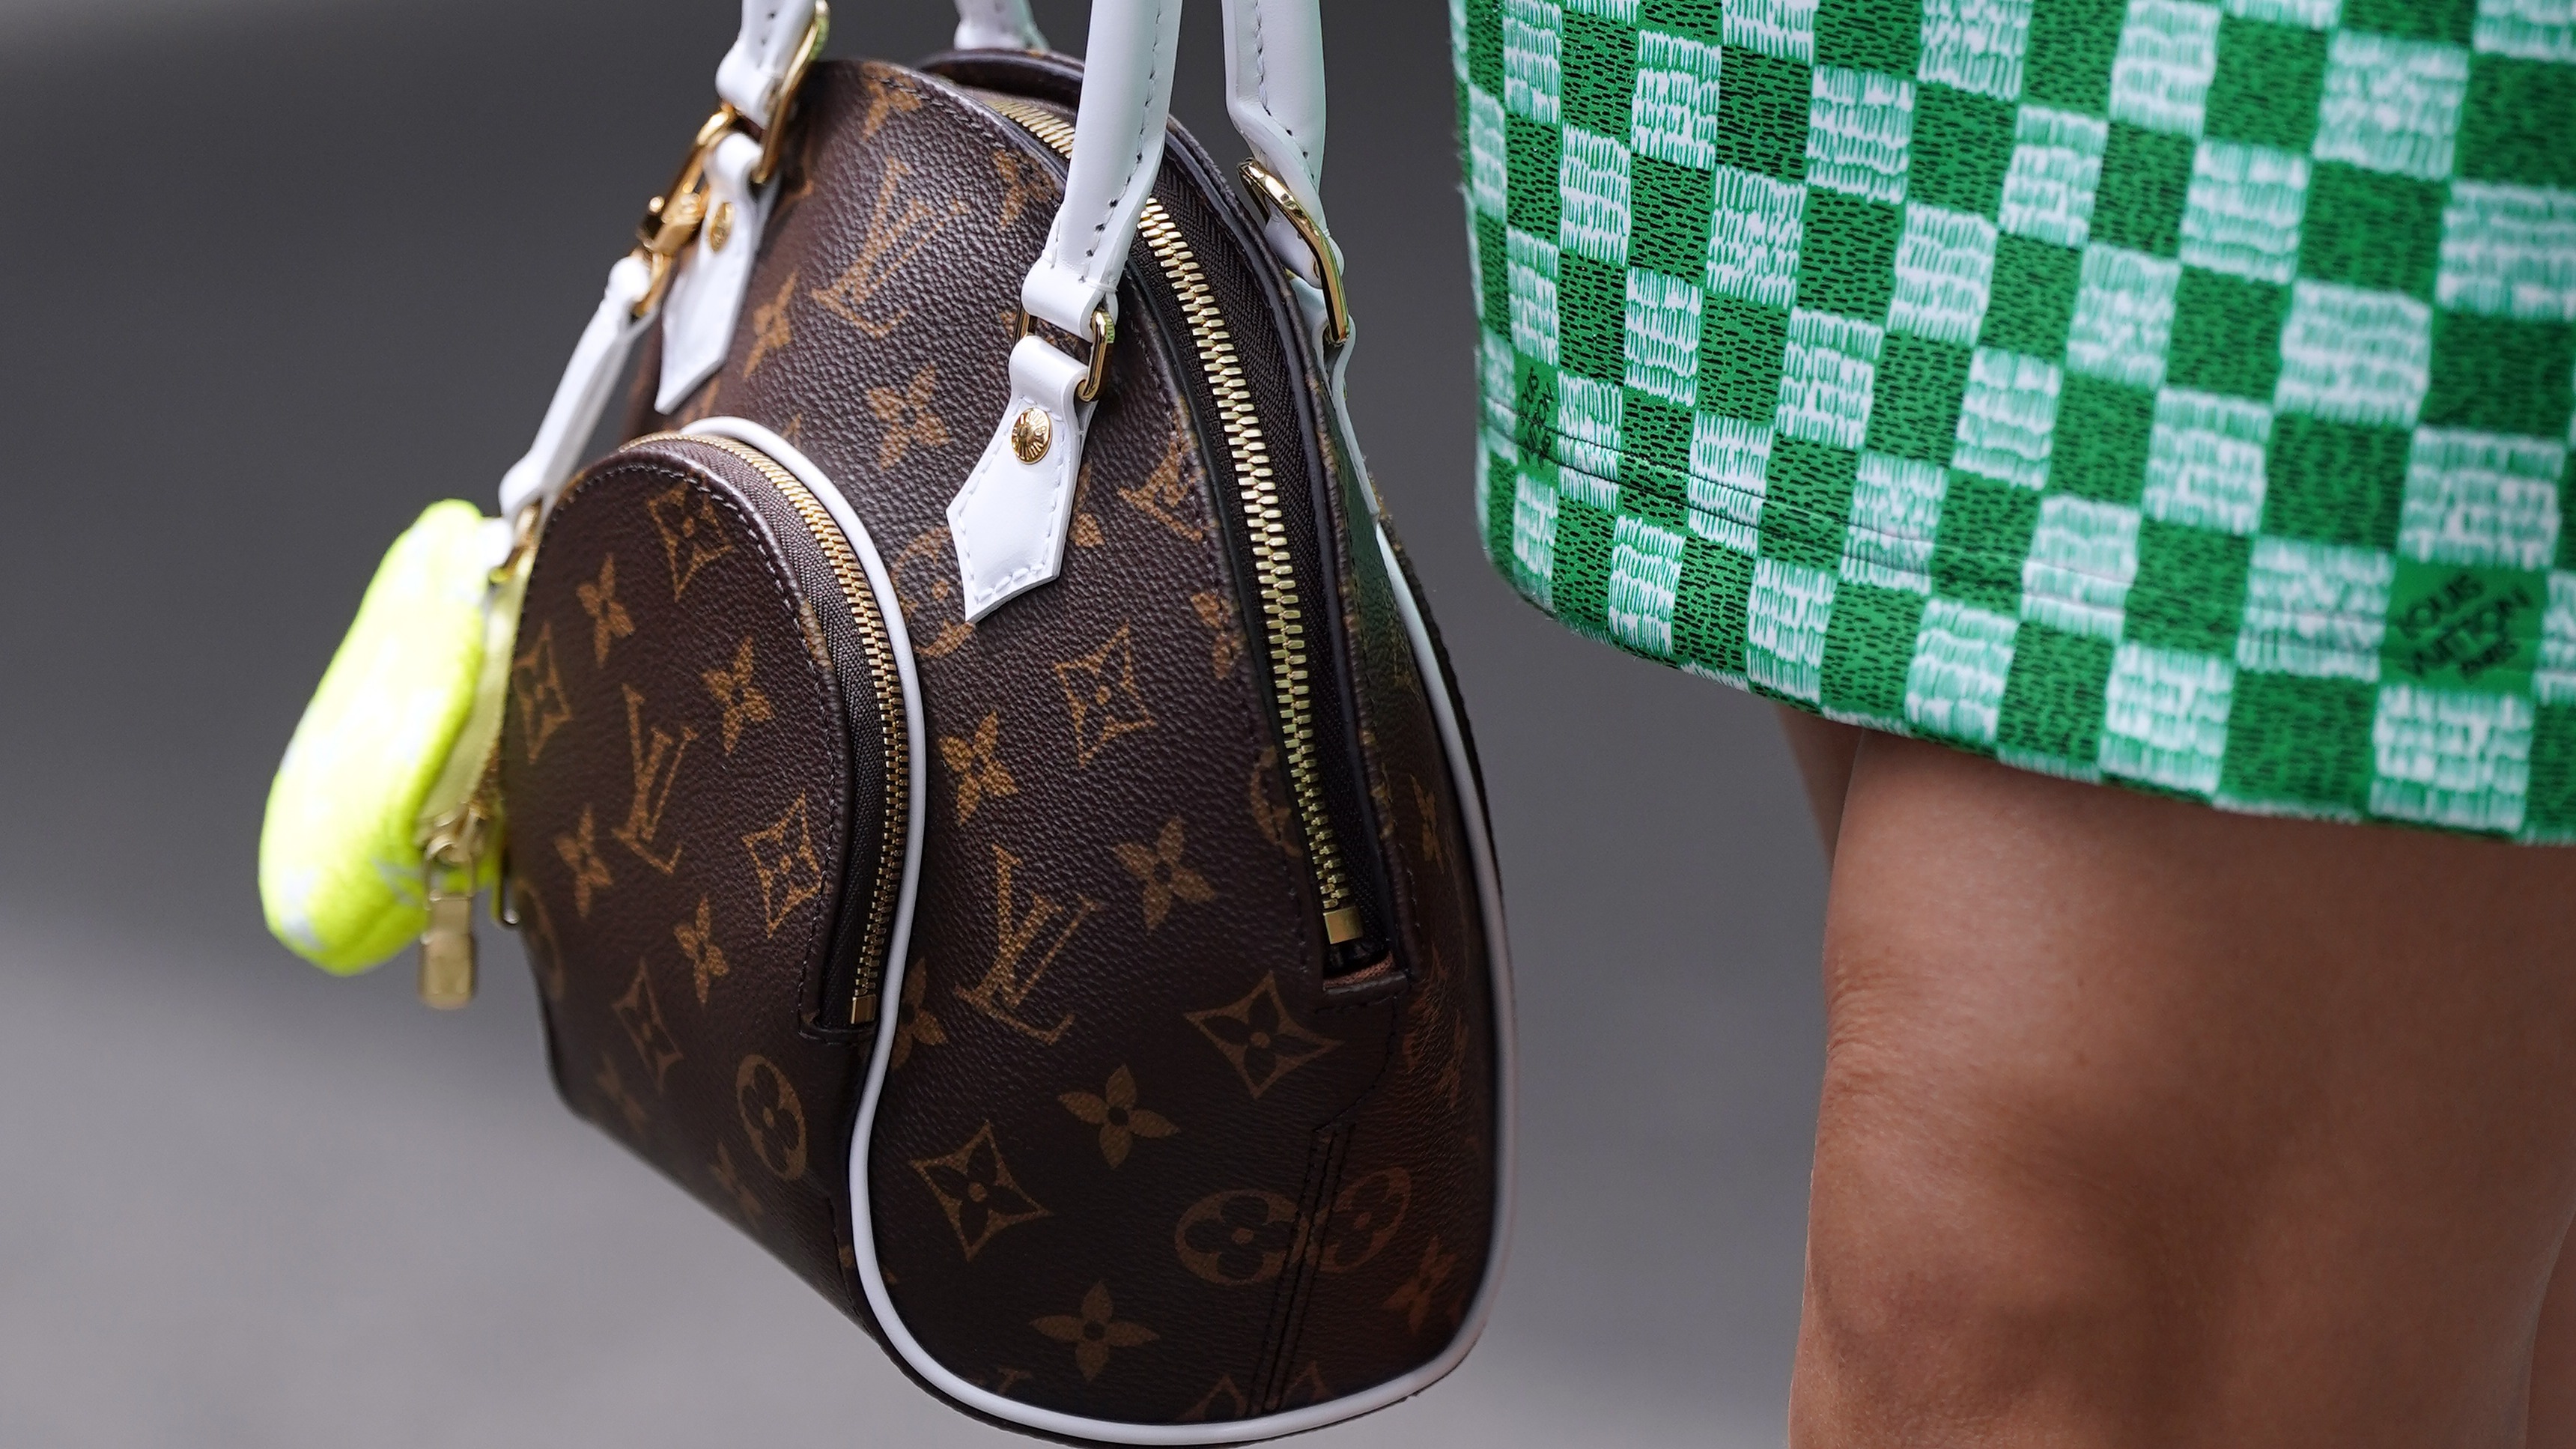 Garden gnome business in legal fight with luxury brand Louis Vuitton over  name trademark